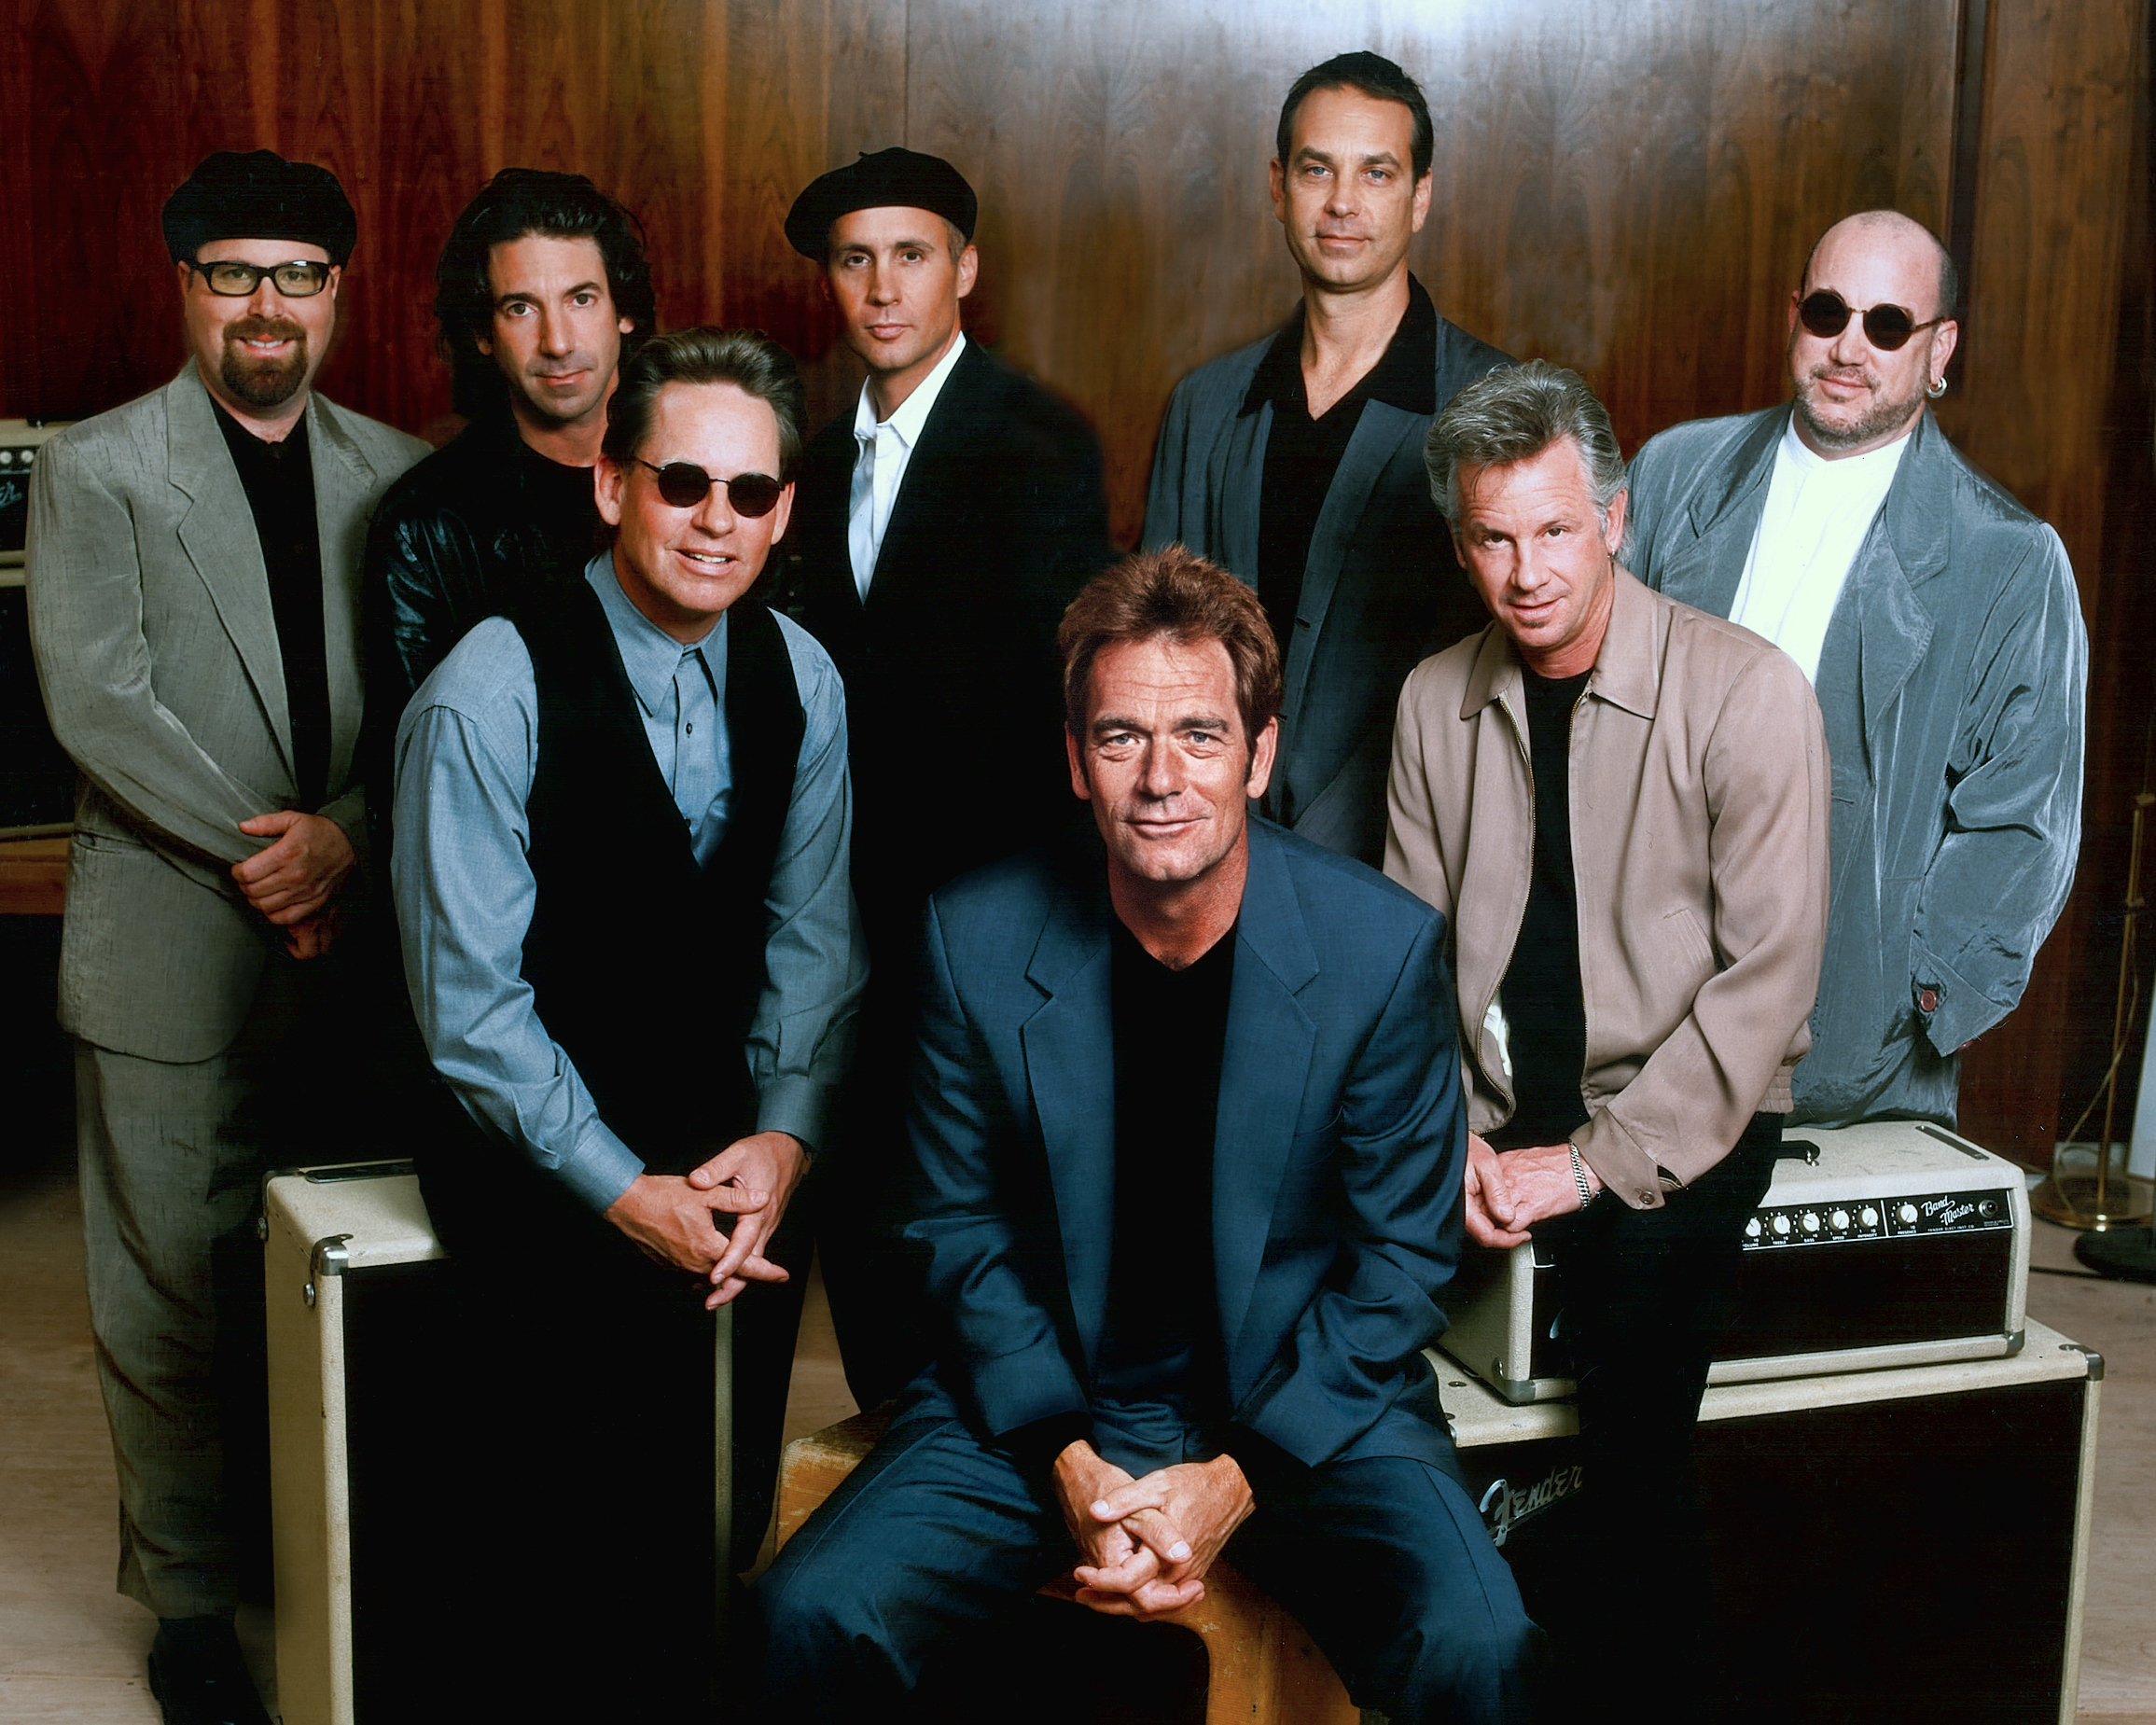 Huey Lewis And The News Backgrounds, Compatible - PC, Mobile, Gadgets| 2311x1849 px